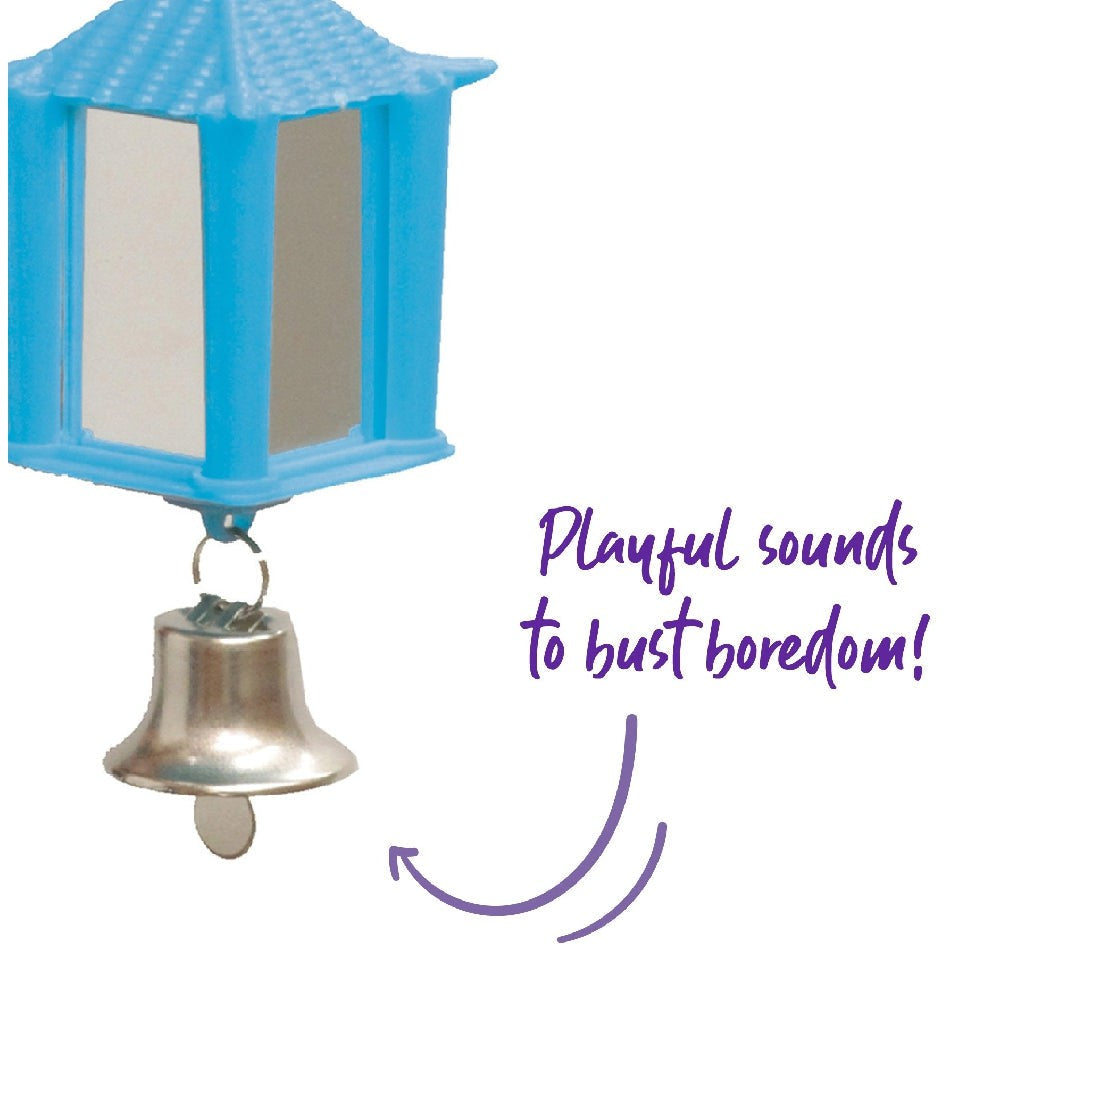 Blue bird toy shaped like a lantern with a bell and slogan.